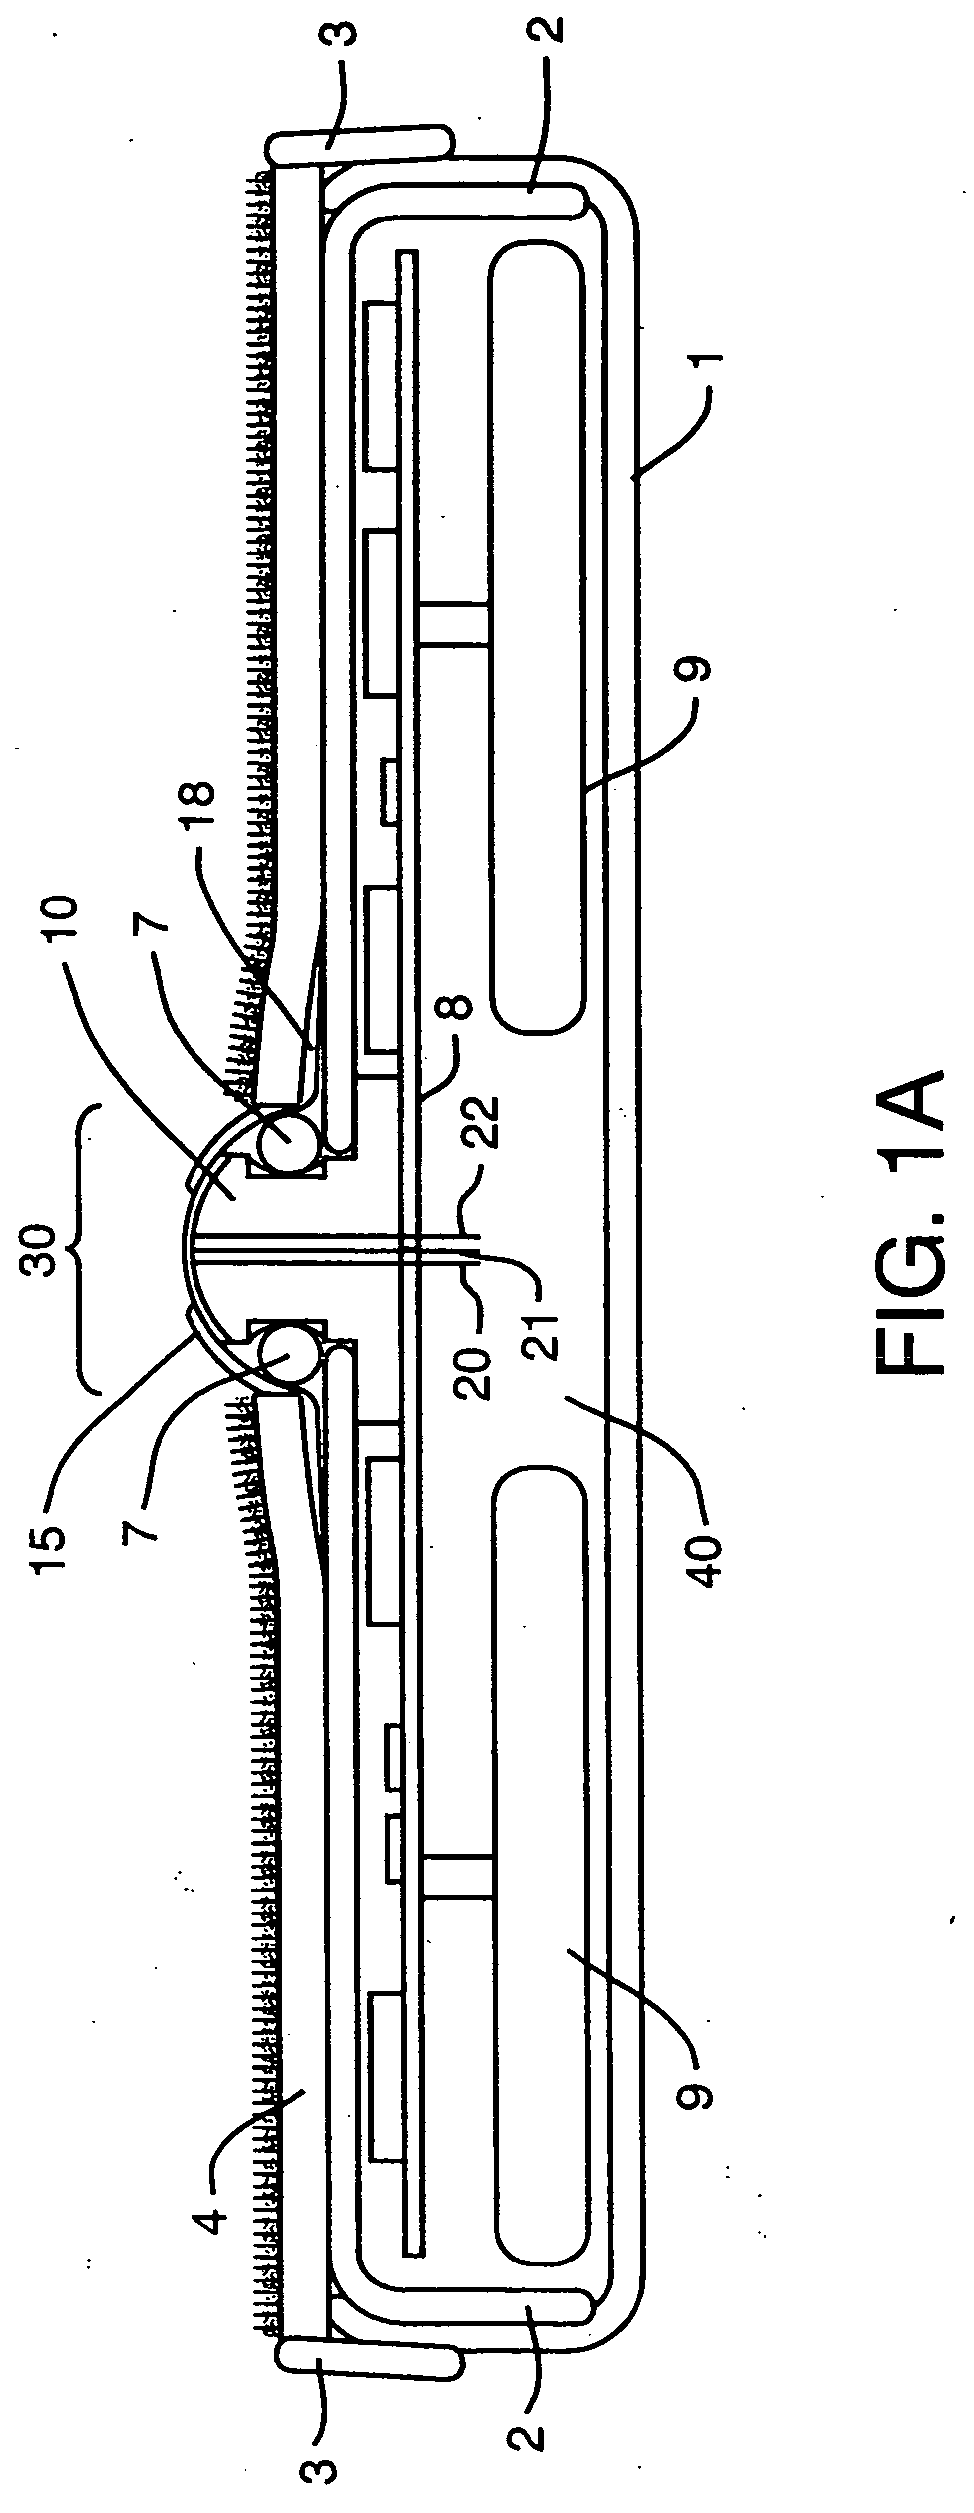 Device and method for determining analyte levels